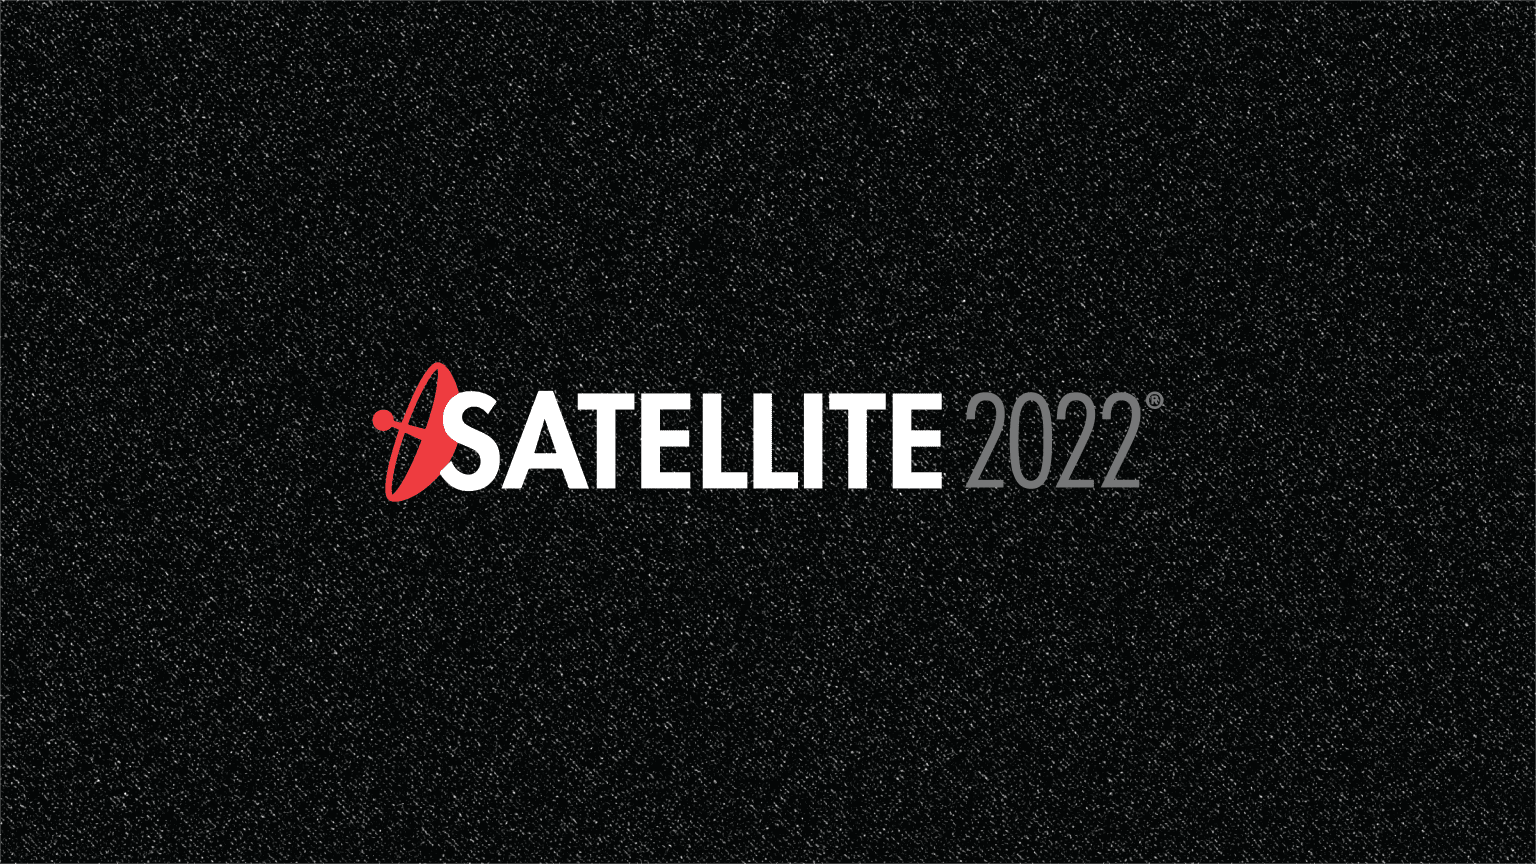 RBS’s Satellite 2022 Conference quick take on cybersecurity: Increasing urgency, few immediate solutions